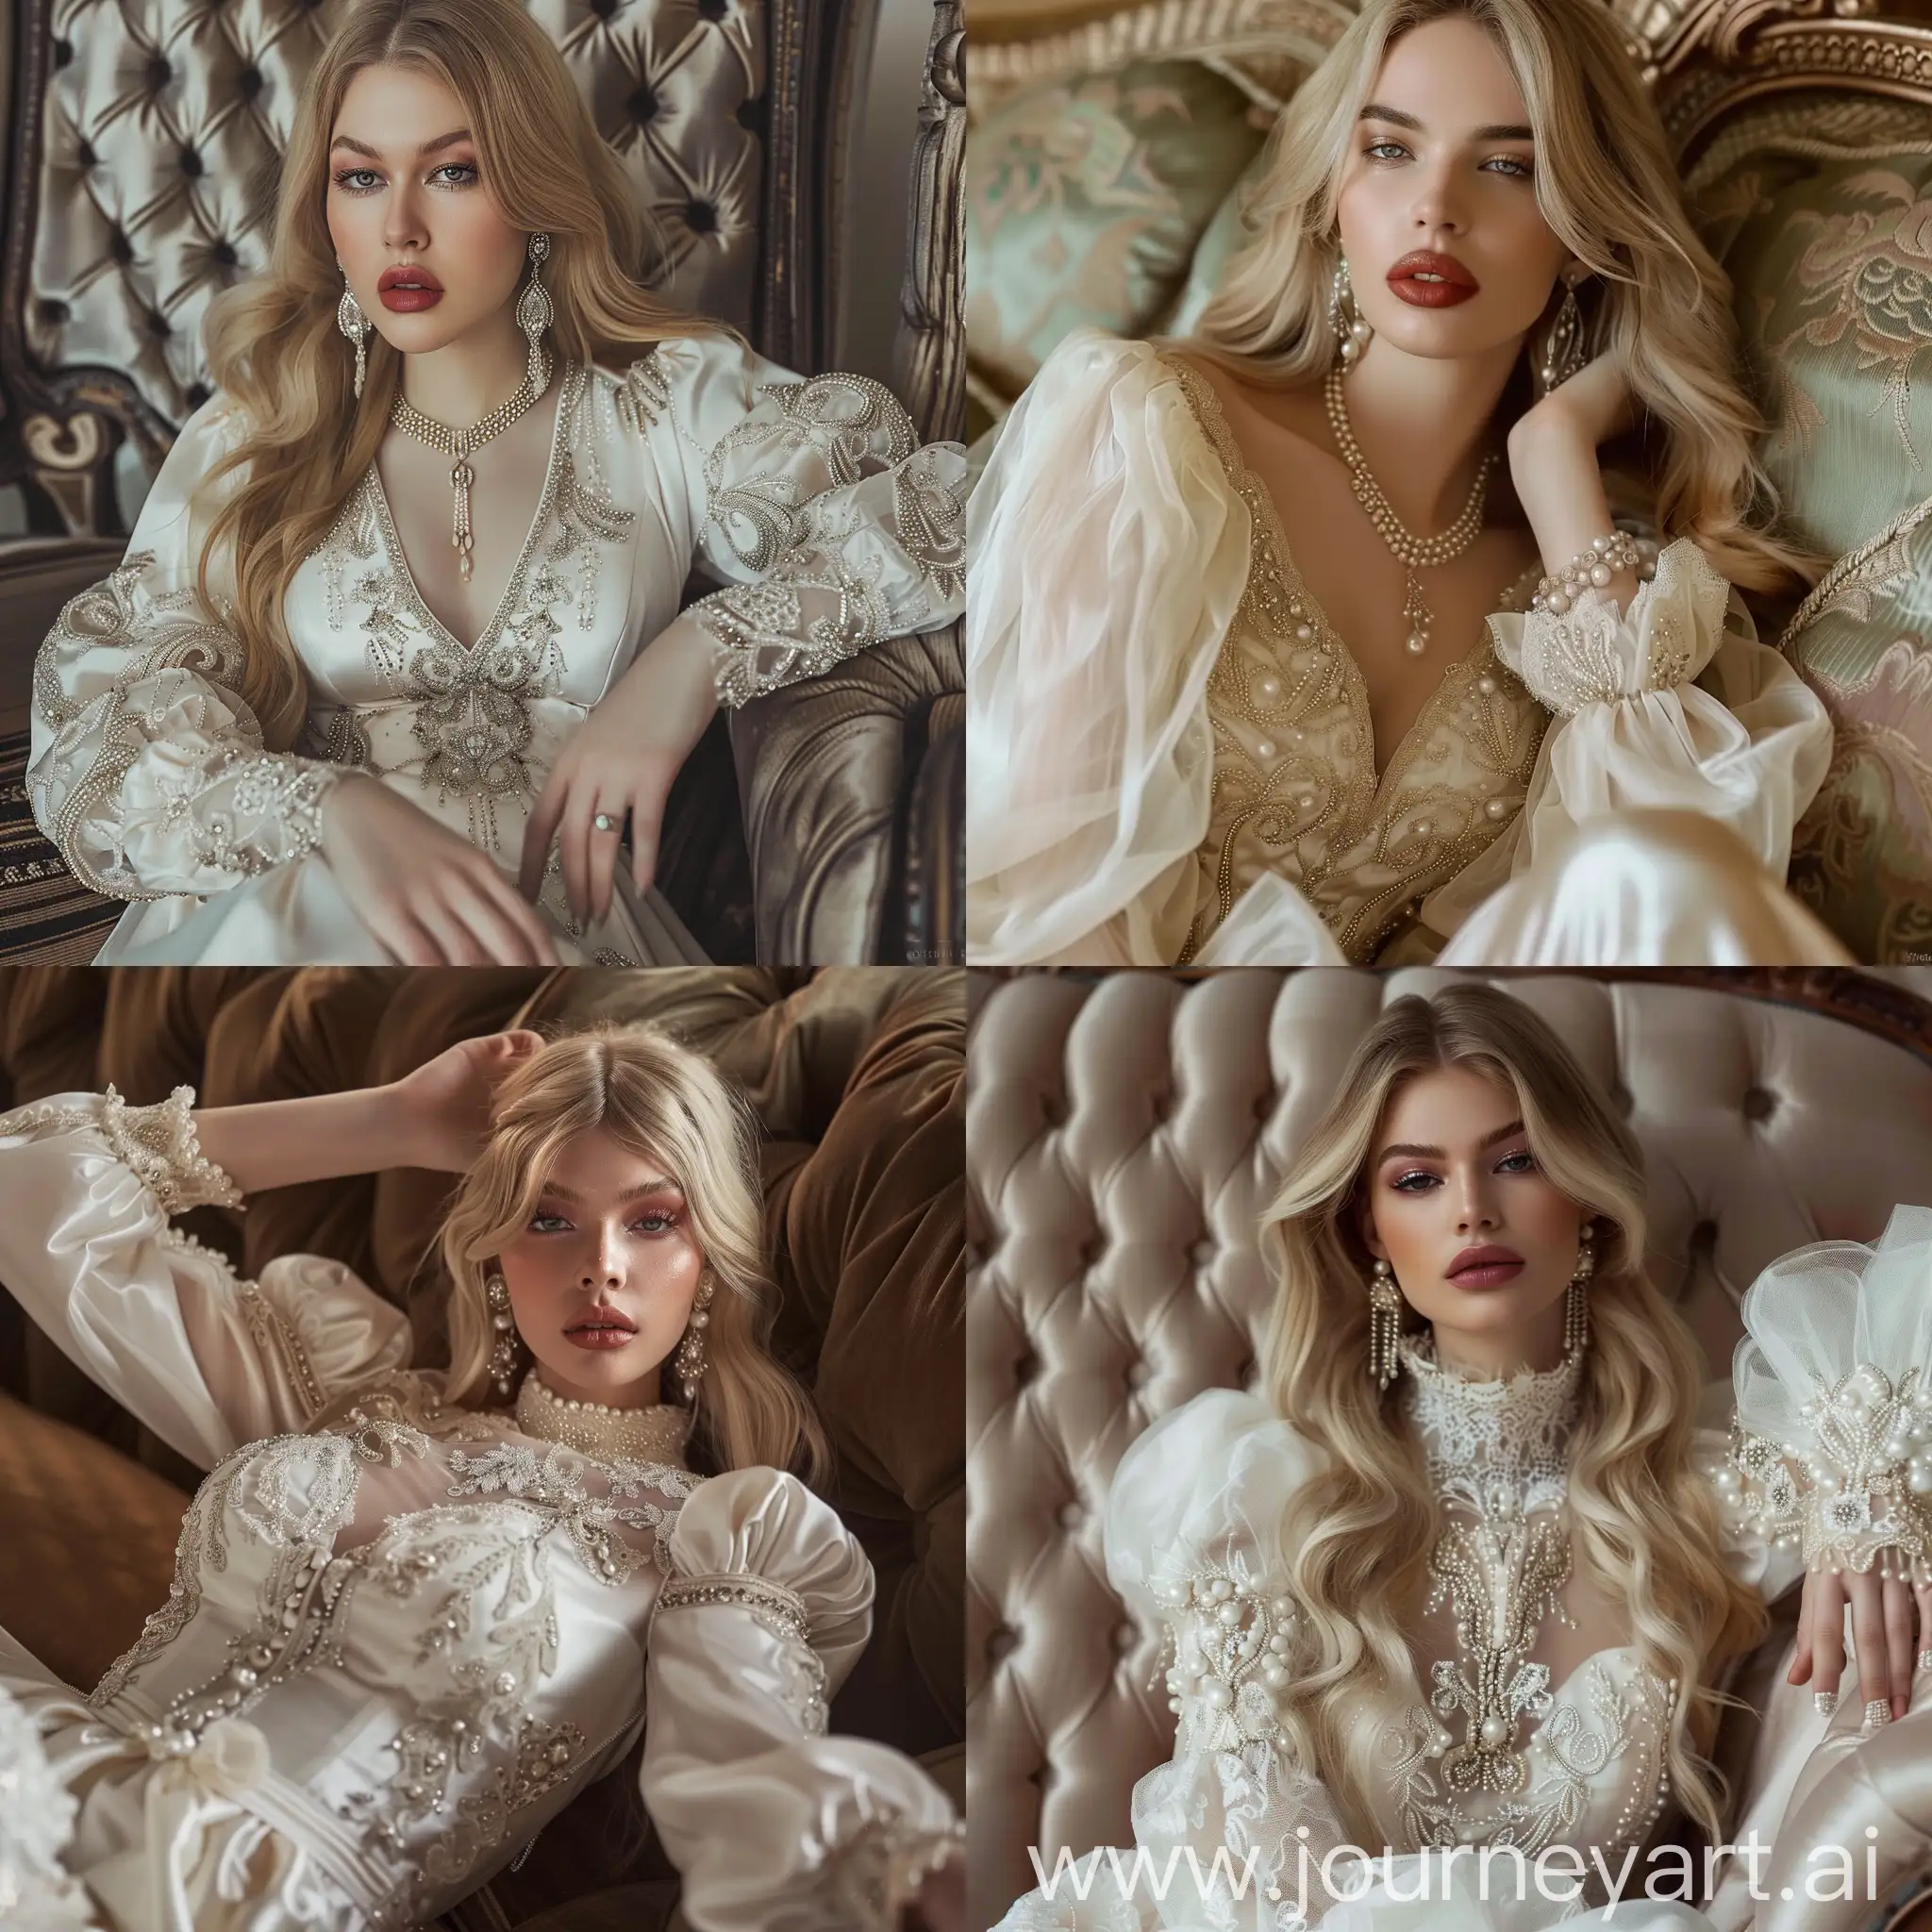 Full-/length model with long blond hair, bright makeup, long earrings, beads on her neck. The model's face is beautiful, soft features. An elegant midi length wedding dress with puffed sleeves and Alexander McQueen style embroidery. The parts are detailed, high quality.,lying on the sofa